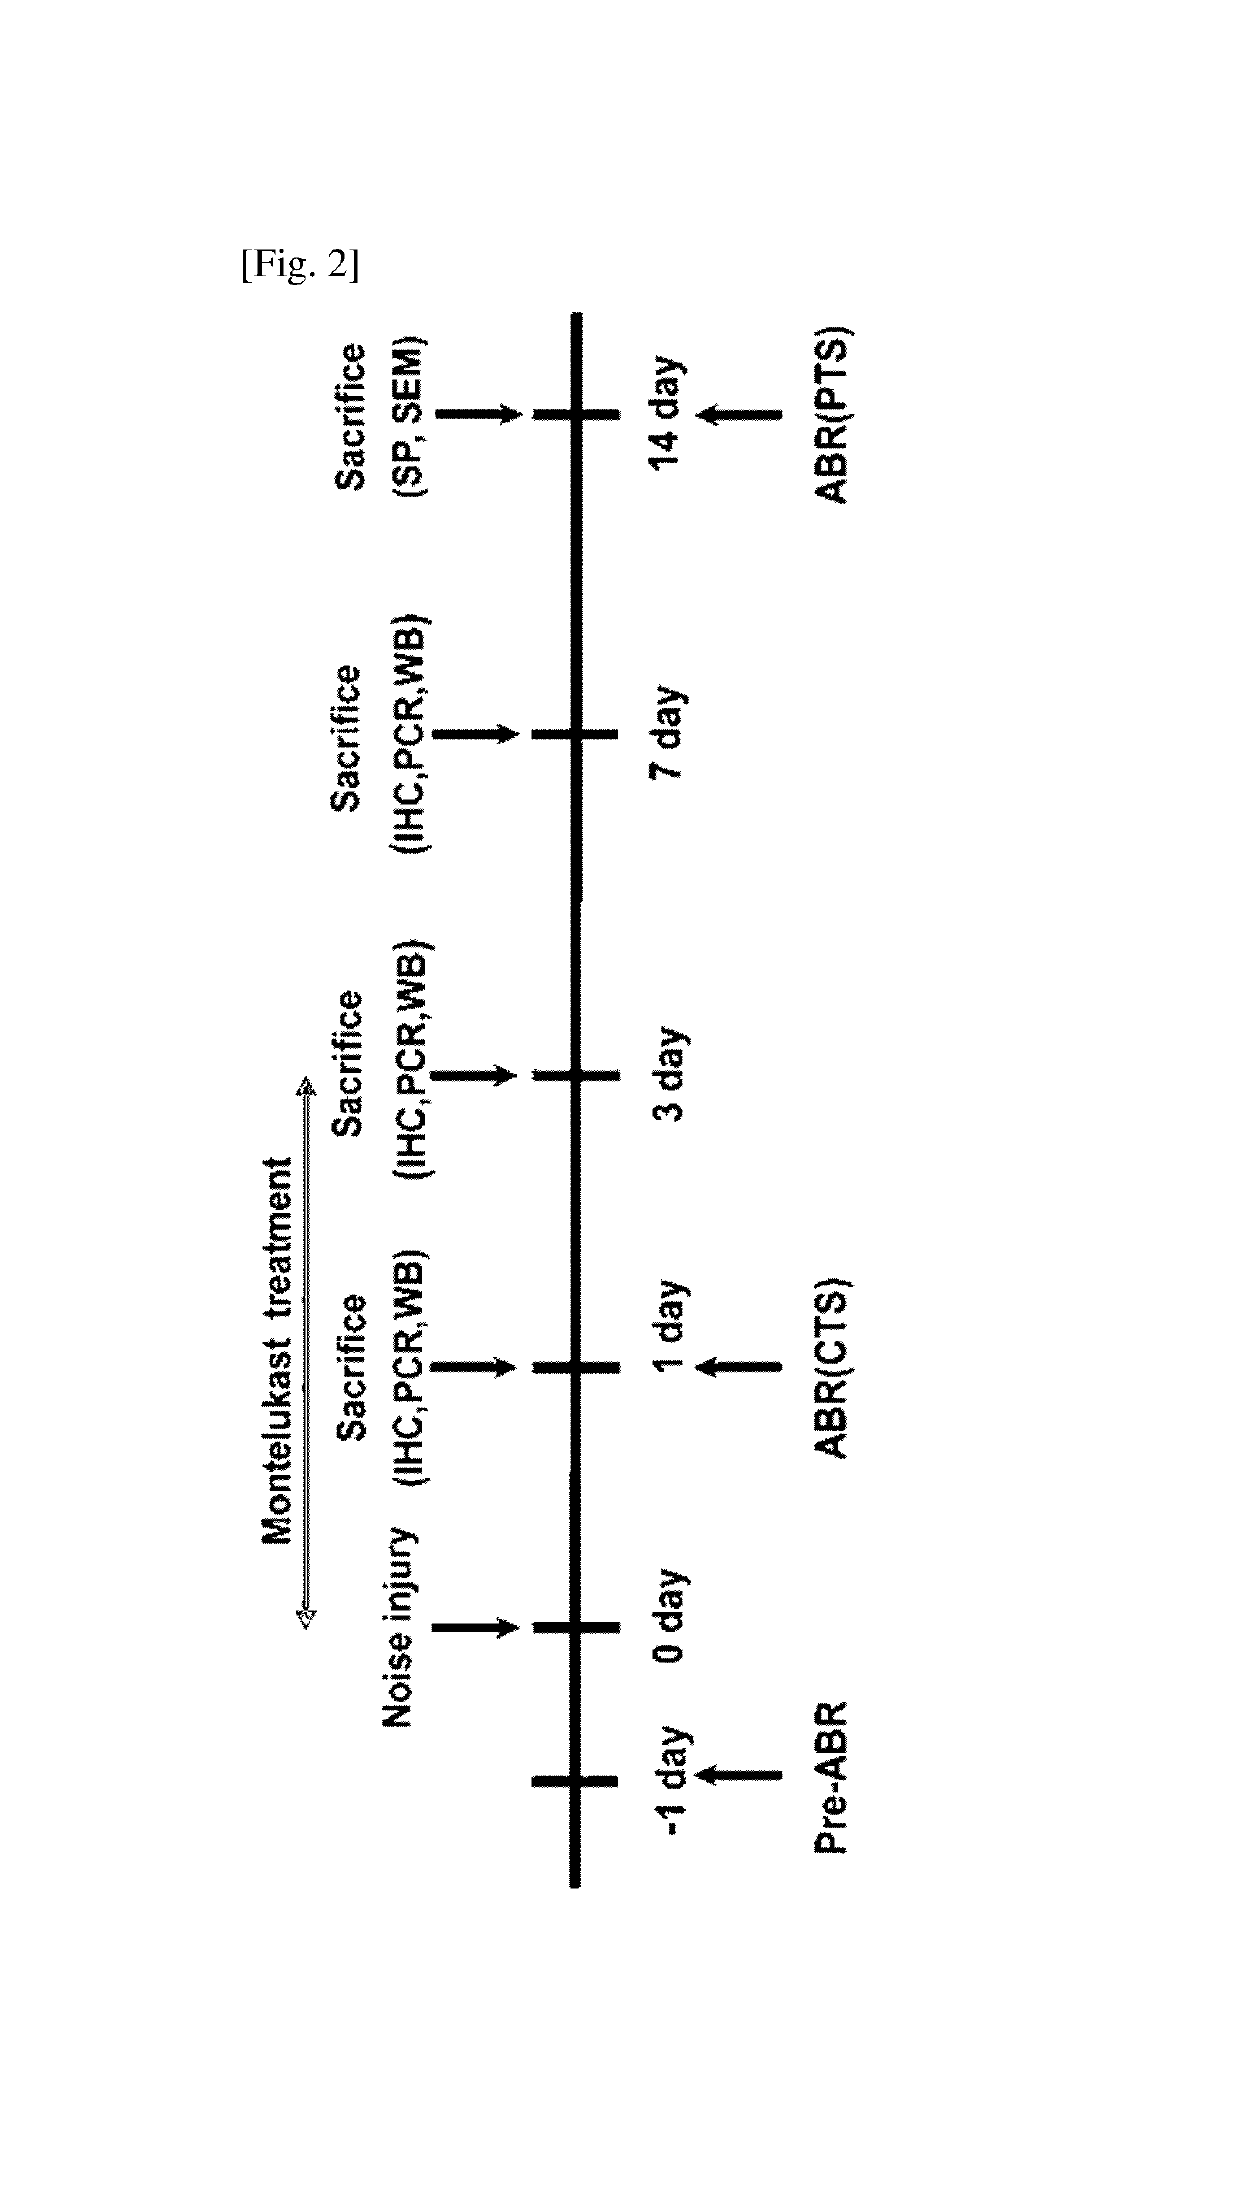 Pharmaceutical composition for treating or preventing sensorineural hearing loss, containing cysteinyl leukotriene receptor antagonist and ginkgo leaf extract